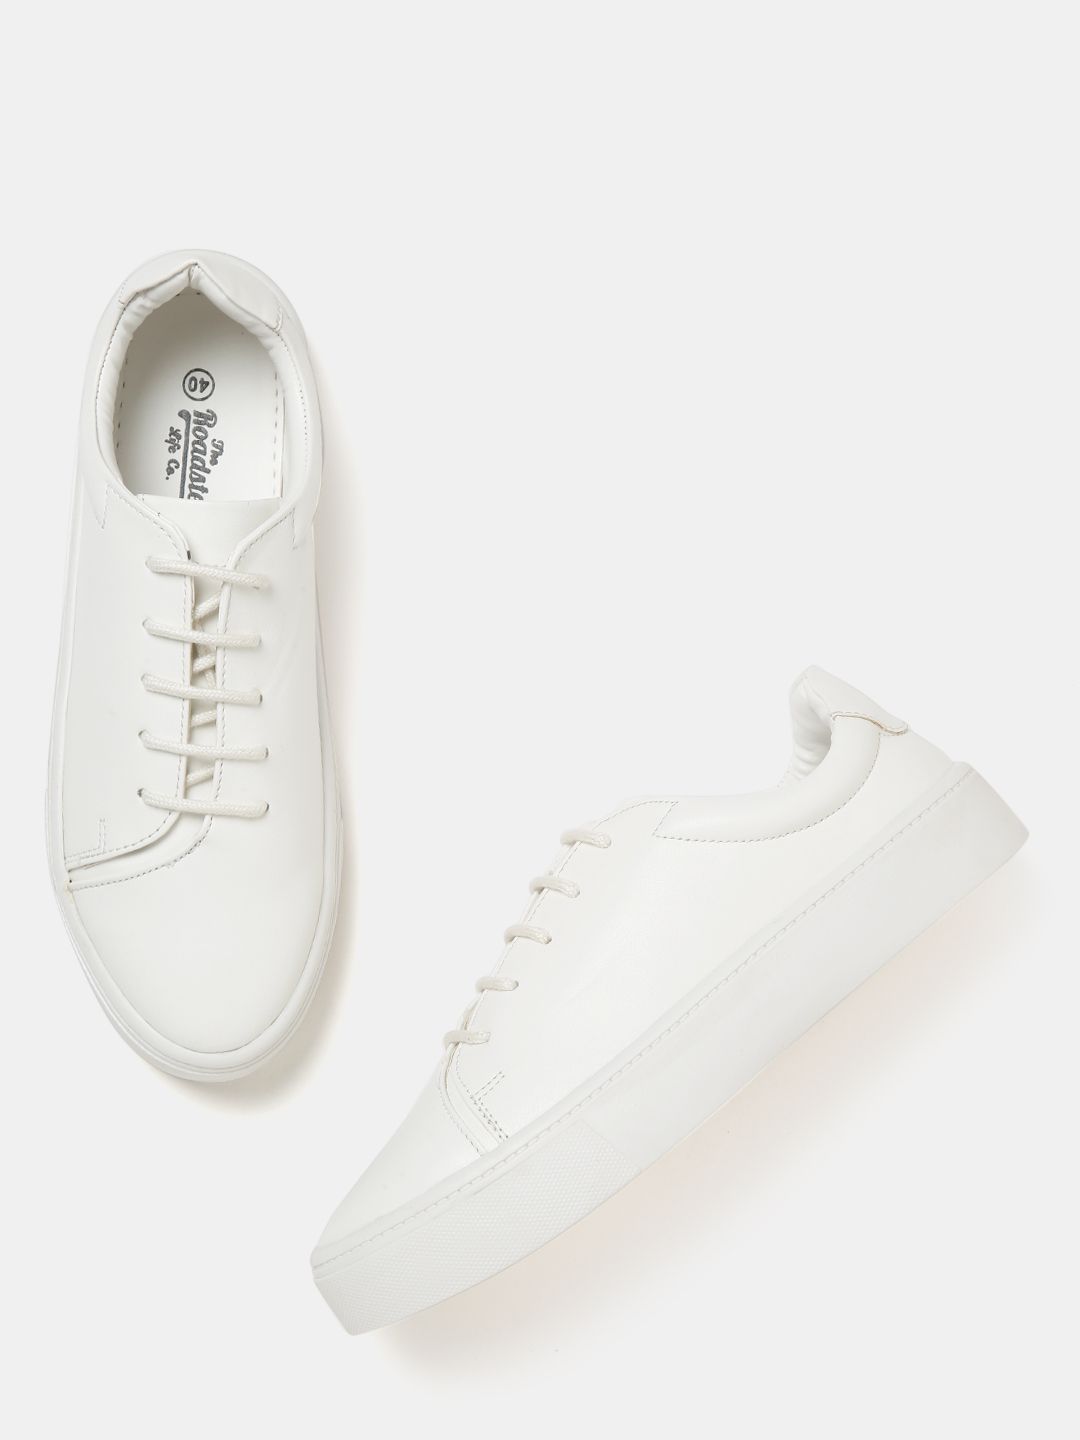 The Roadster Lifestyle Co Women White Sneakers Price in India